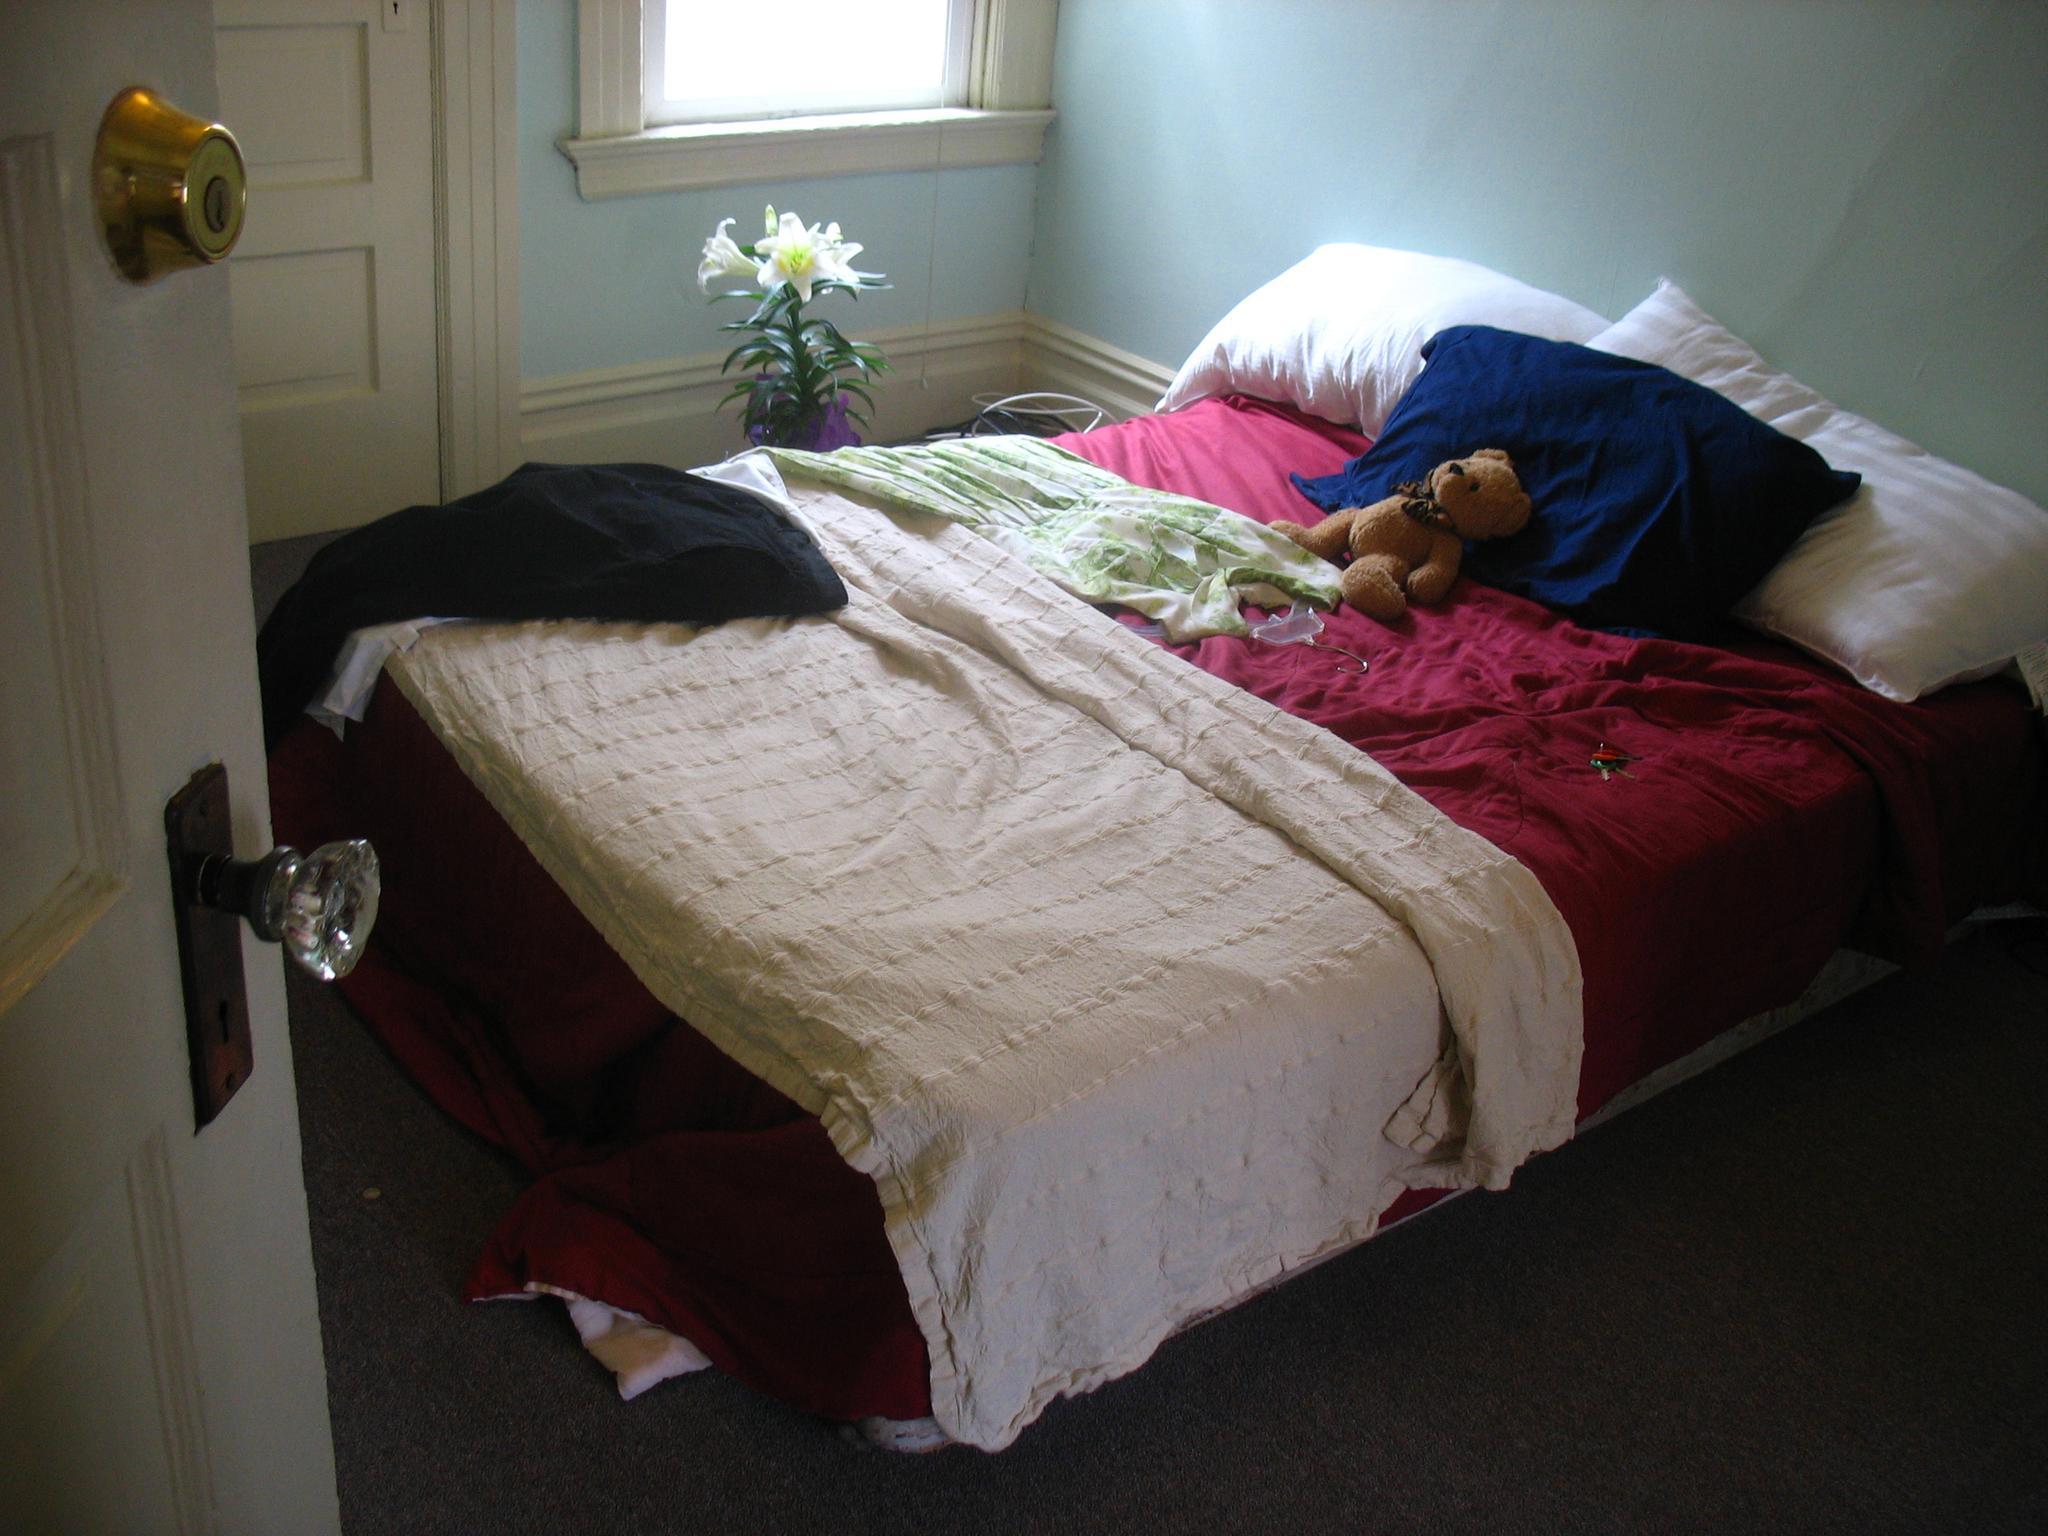 a bed with various blankets and stuffed animals